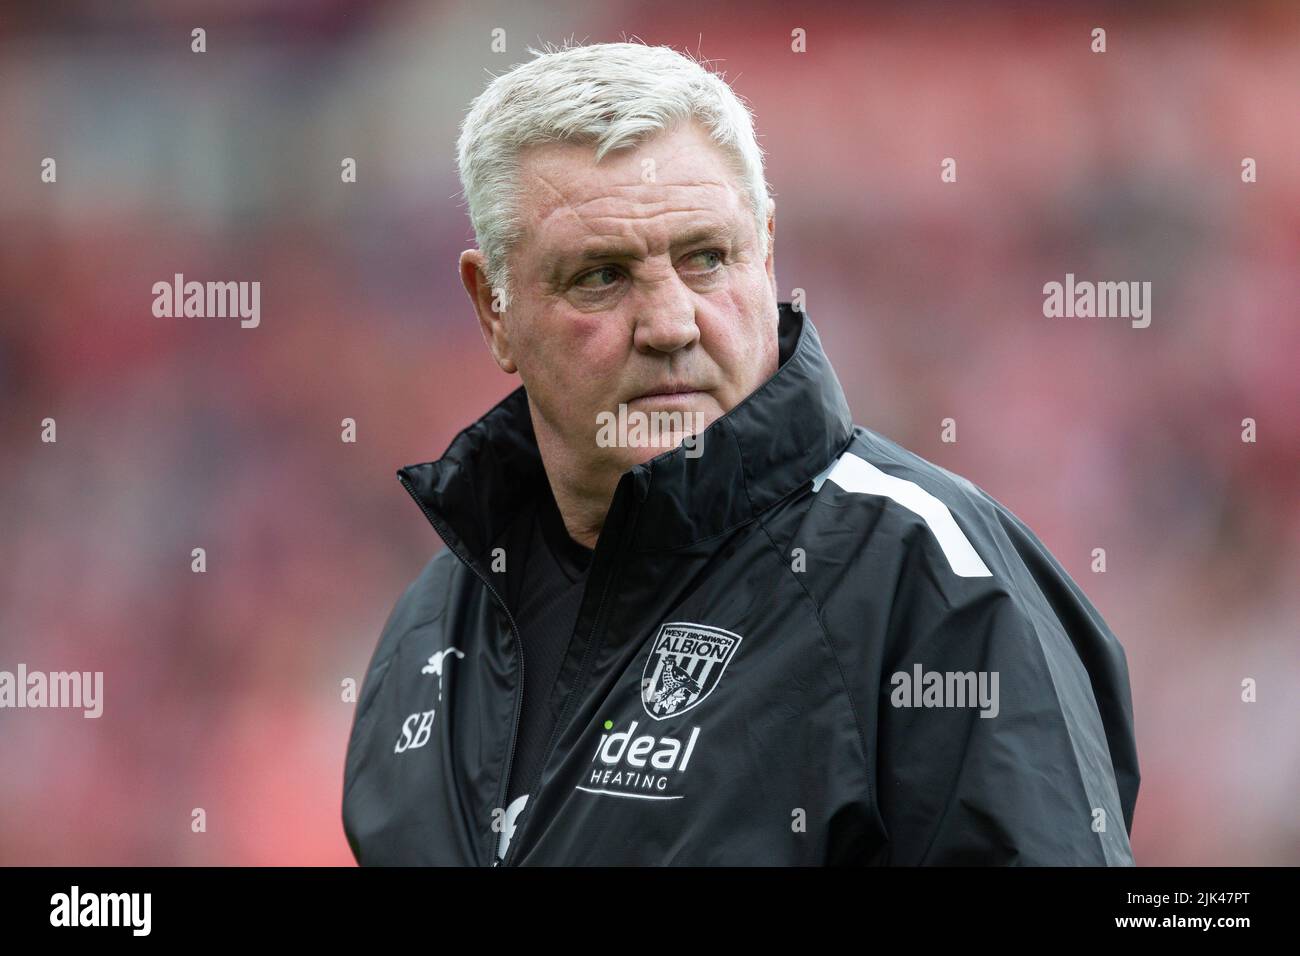 Steve Bruce manager of West Bromwich Albion during the game Stock Photo